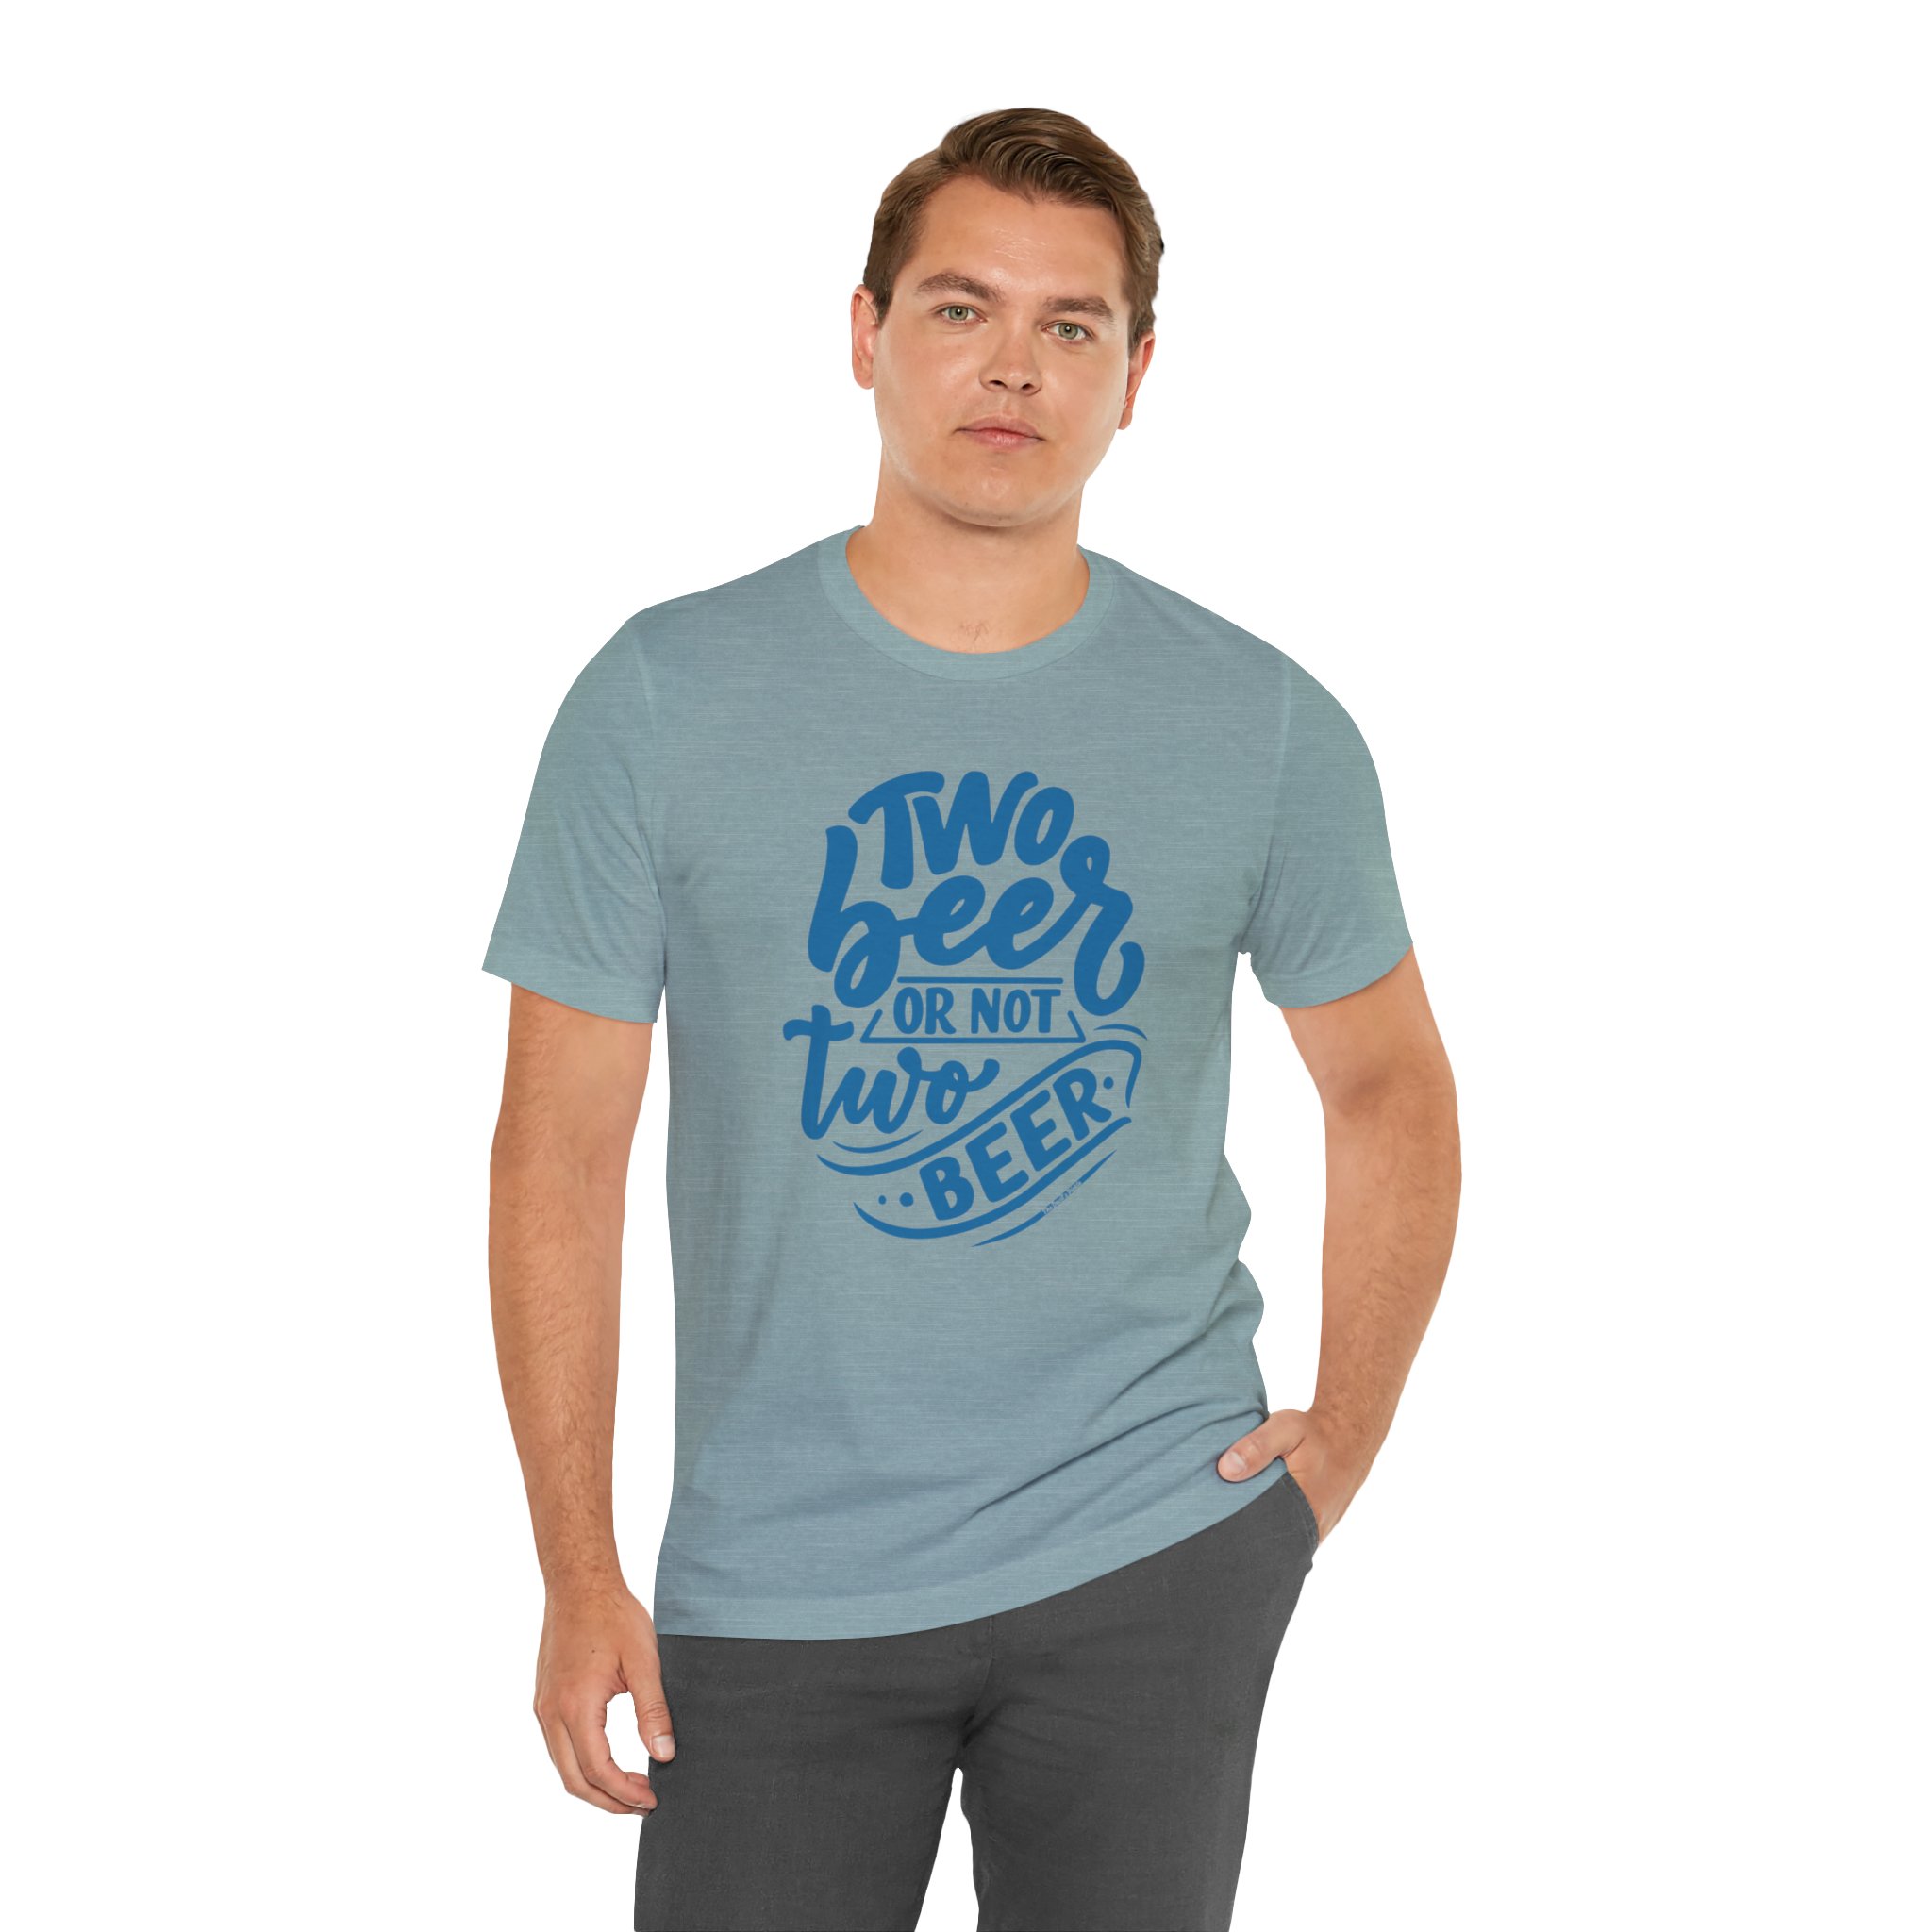 Two Beer or Not Two Beer T-Shirt - Walmart.com